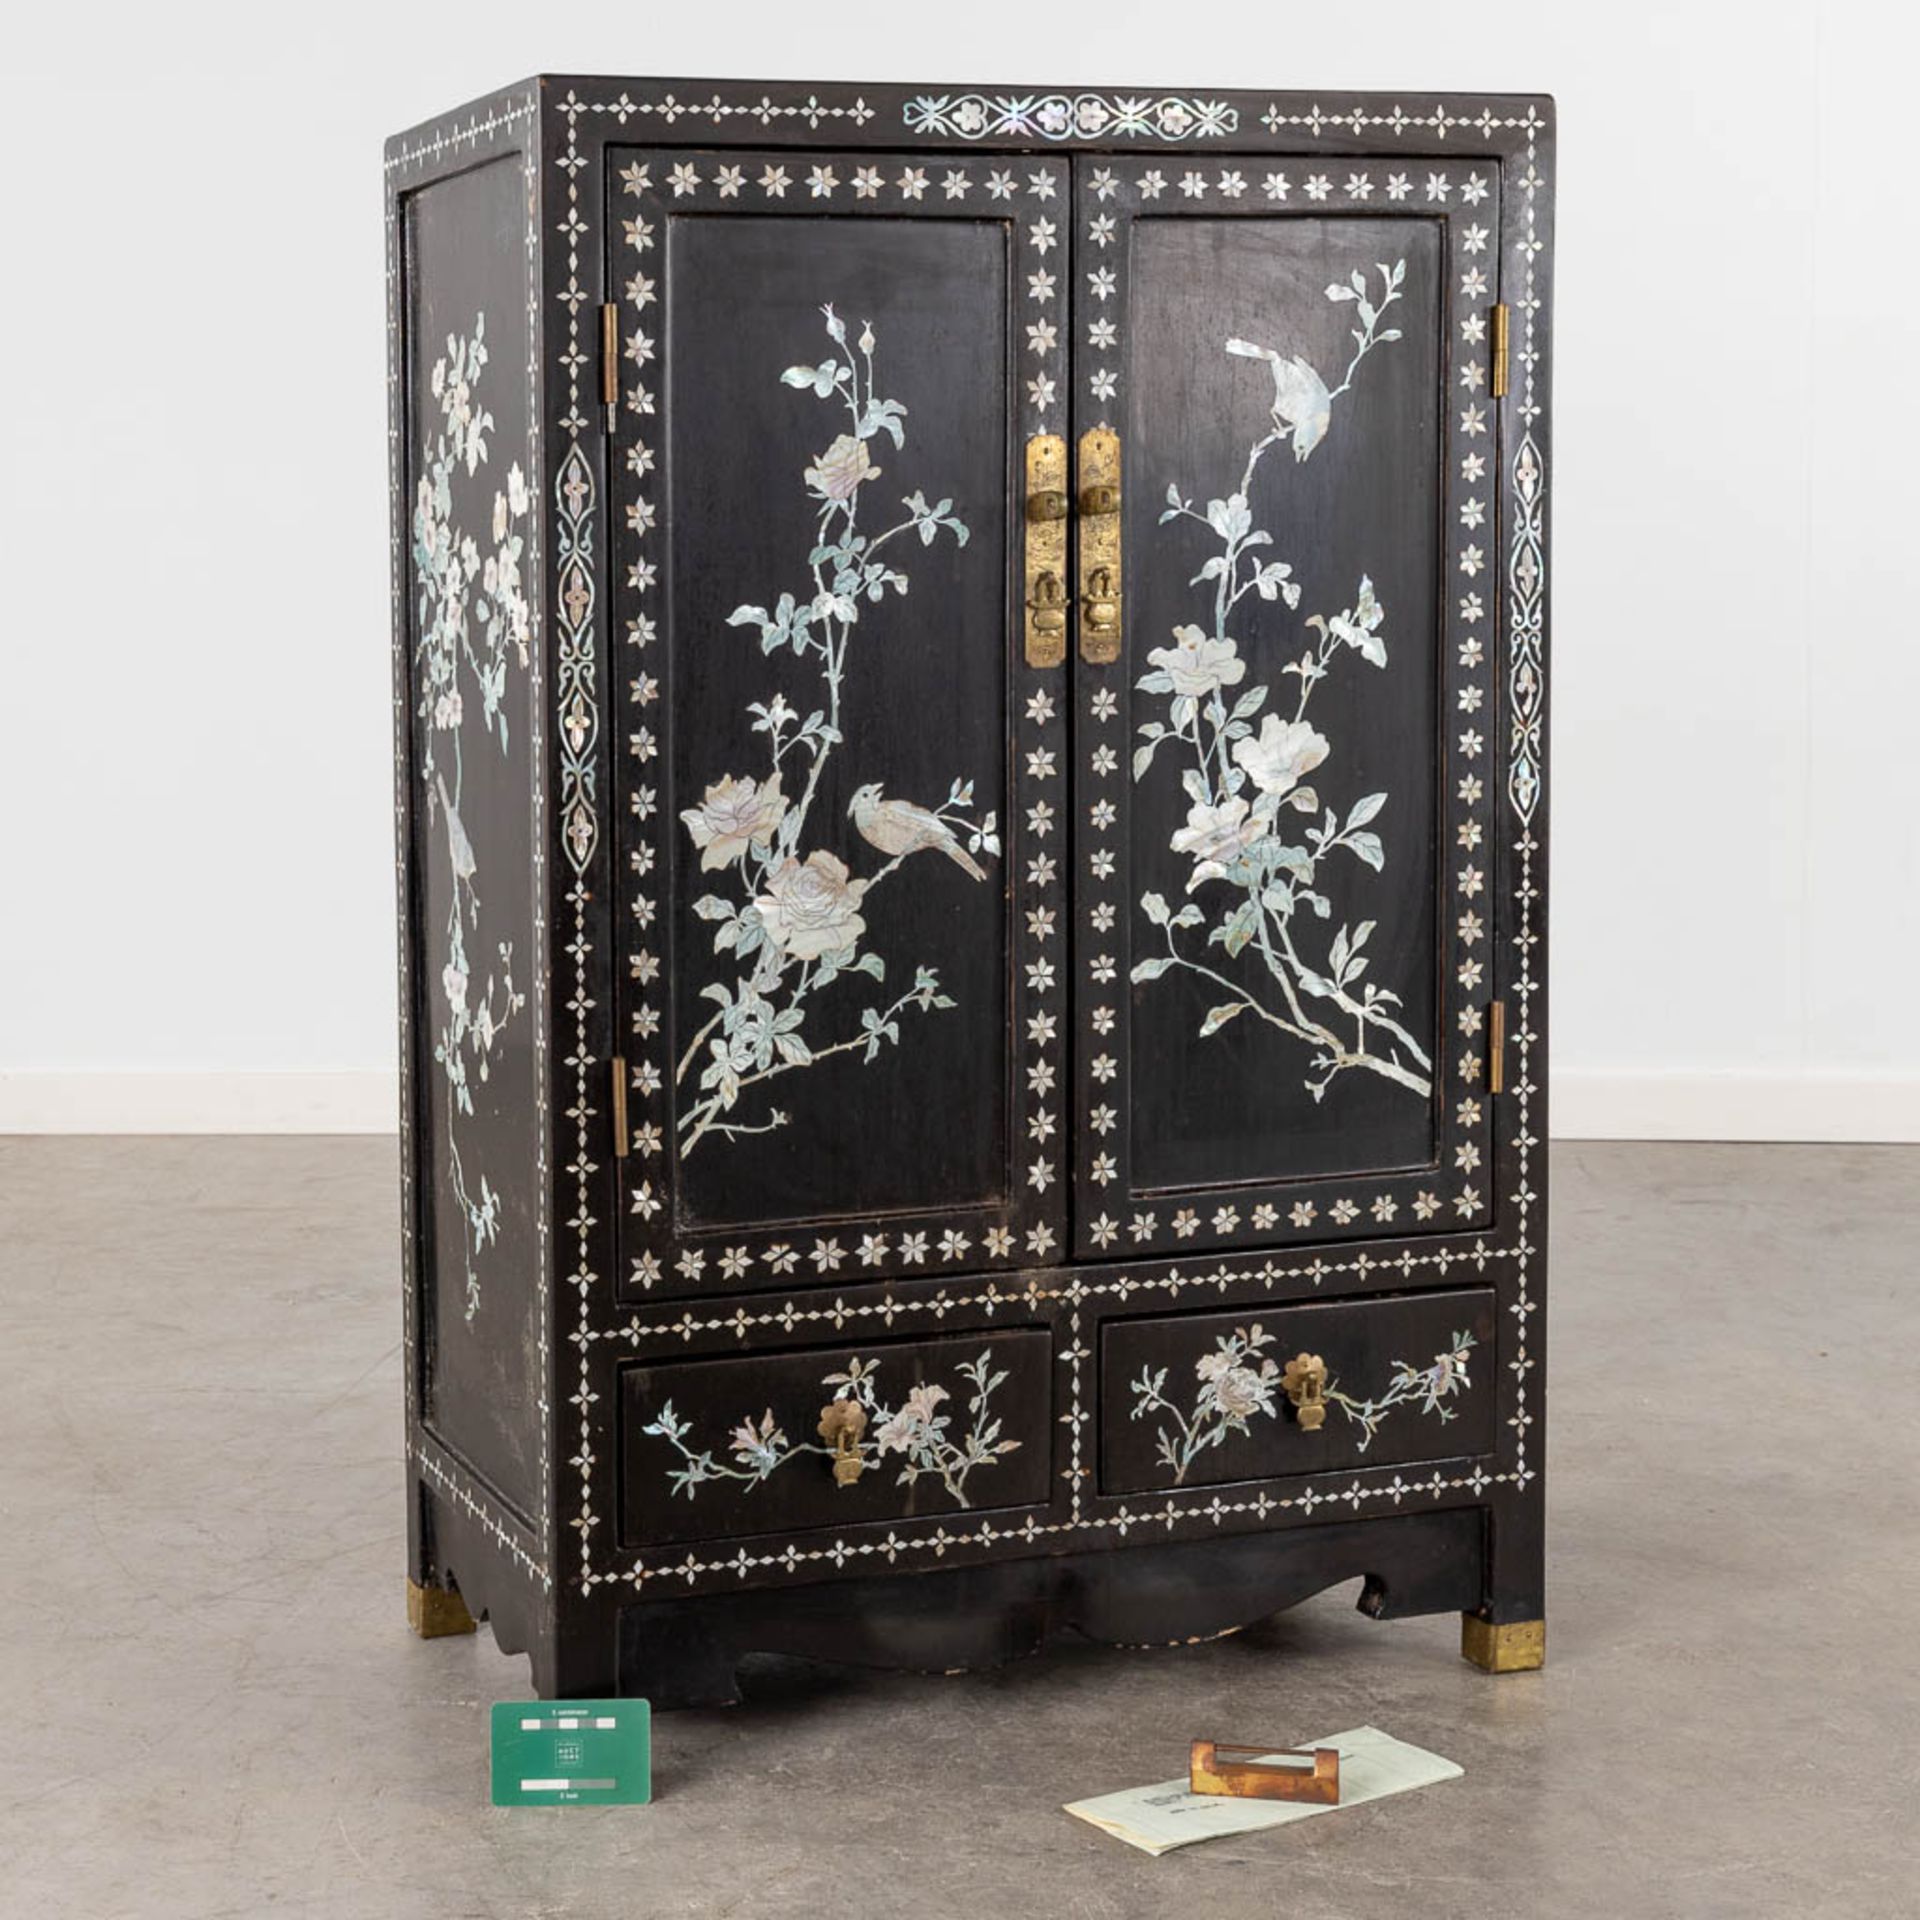 A Chinoiserie cabinet, mother of pearl inlay in ebonised wood. 20th C. (D:31 x W:61 x H:92 cm) - Bild 2 aus 14